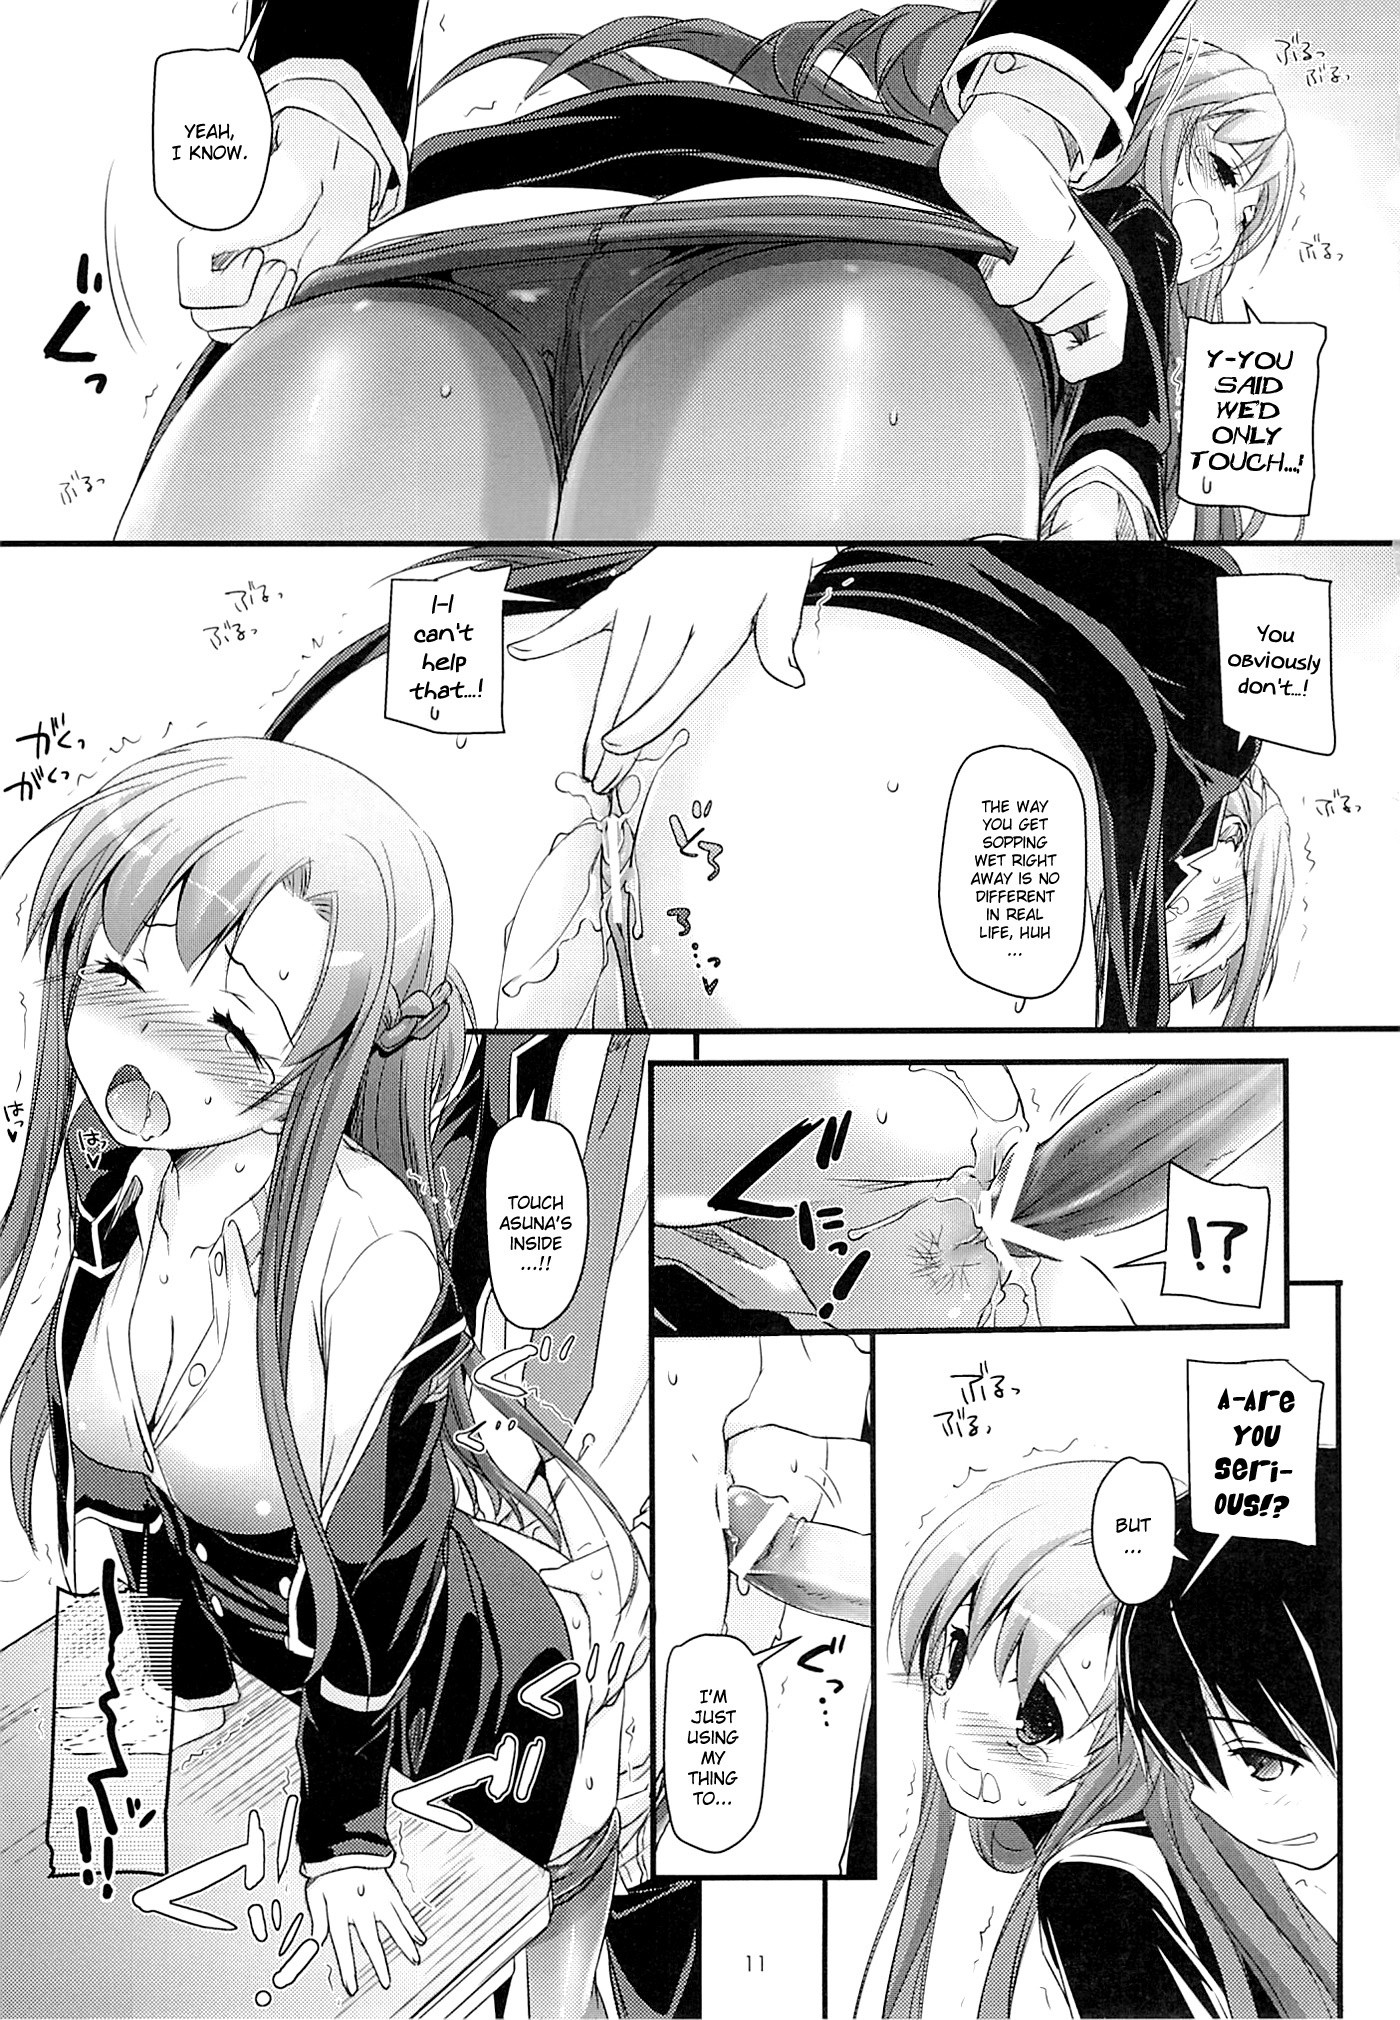 D.L. Action 74 hentai manga picture 10